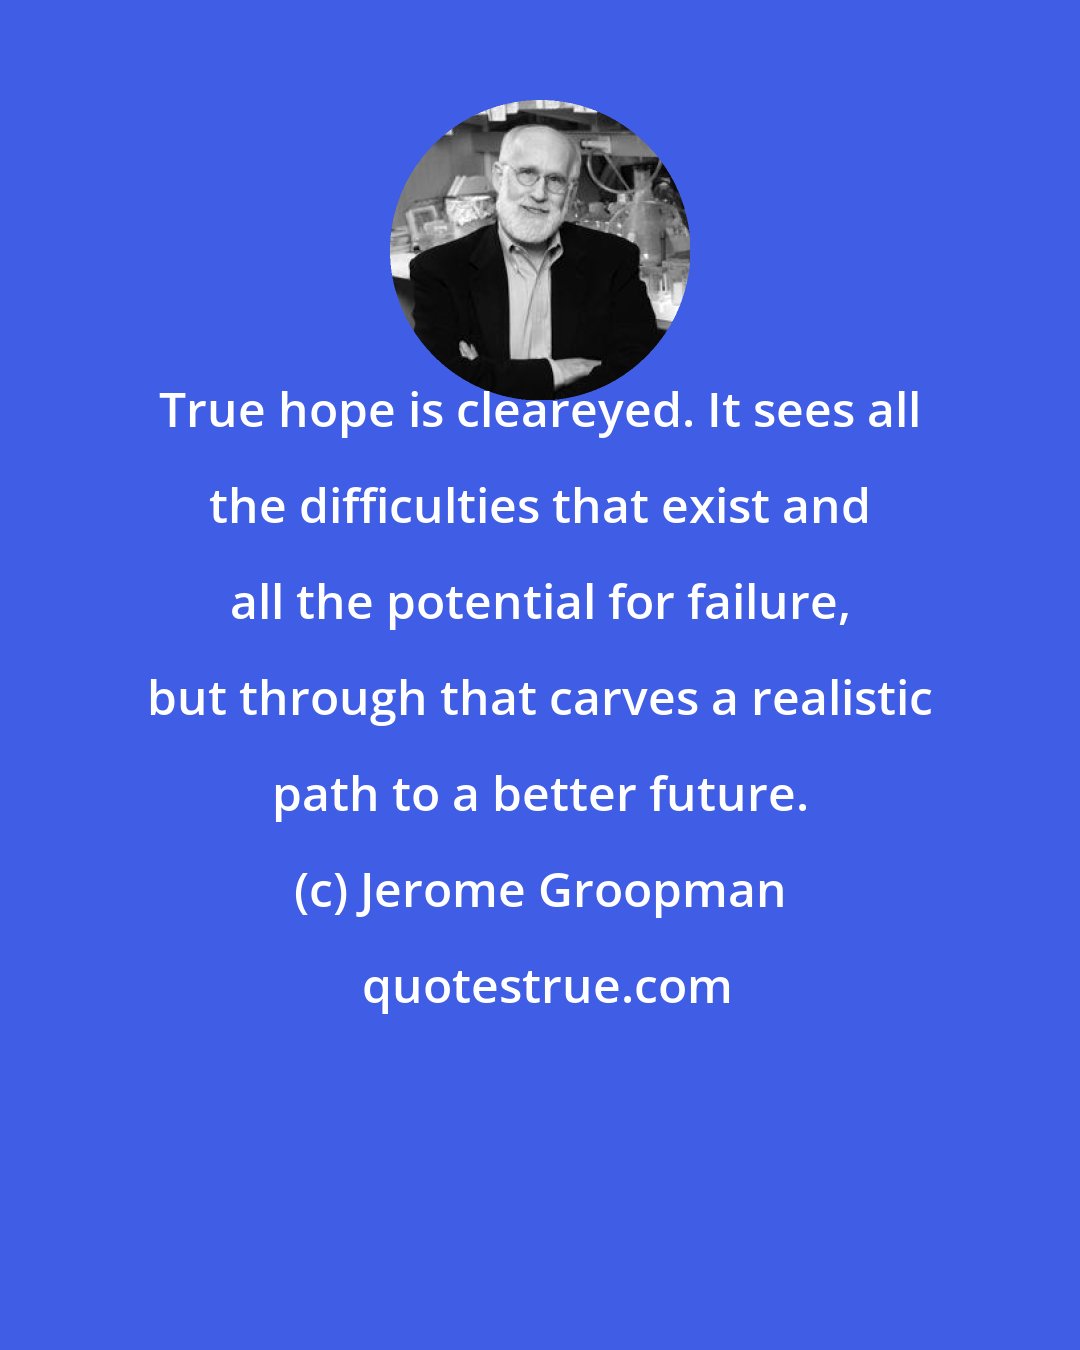 Jerome Groopman: True hope is cleareyed. It sees all the difficulties that exist and all the potential for failure, but through that carves a realistic path to a better future.